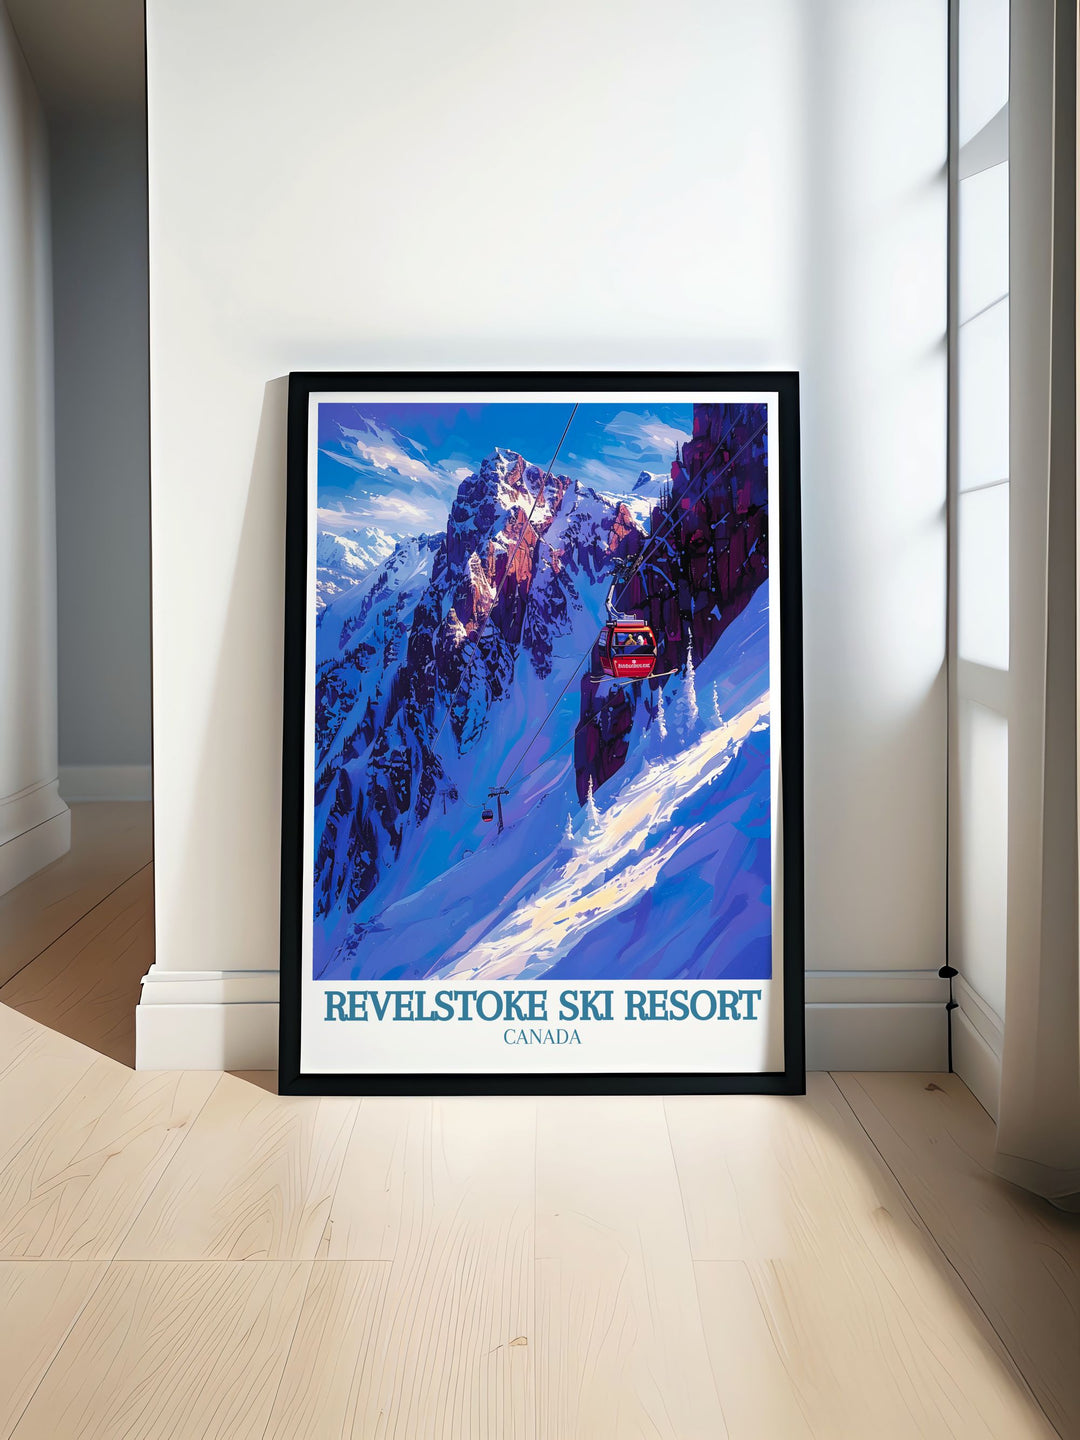 Revelstoke Poster featuring Mount Mackenzie and the Revelation Gondola cable car. This Ski Resort Print brings the beauty of British Columbia into your home. Perfect for adding a touch of adventure and elegance to your decor.